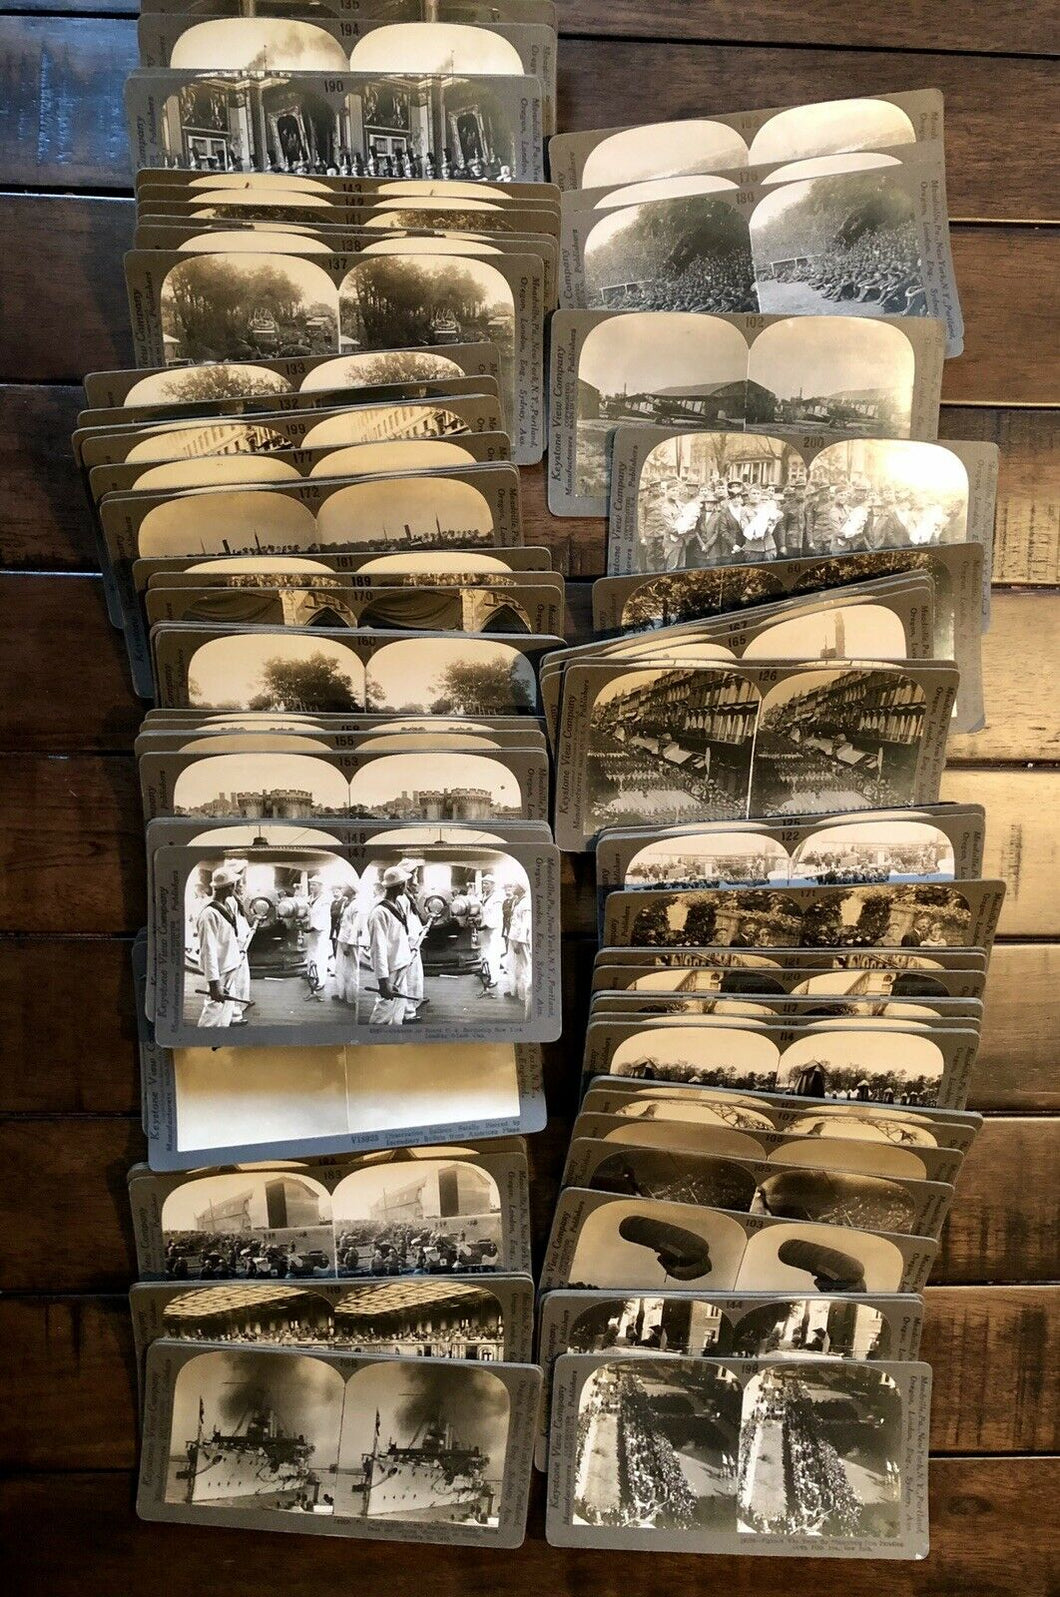 Lot of Antique WWI Keystone Stereoview Photos - 92 Total - Free Shipping